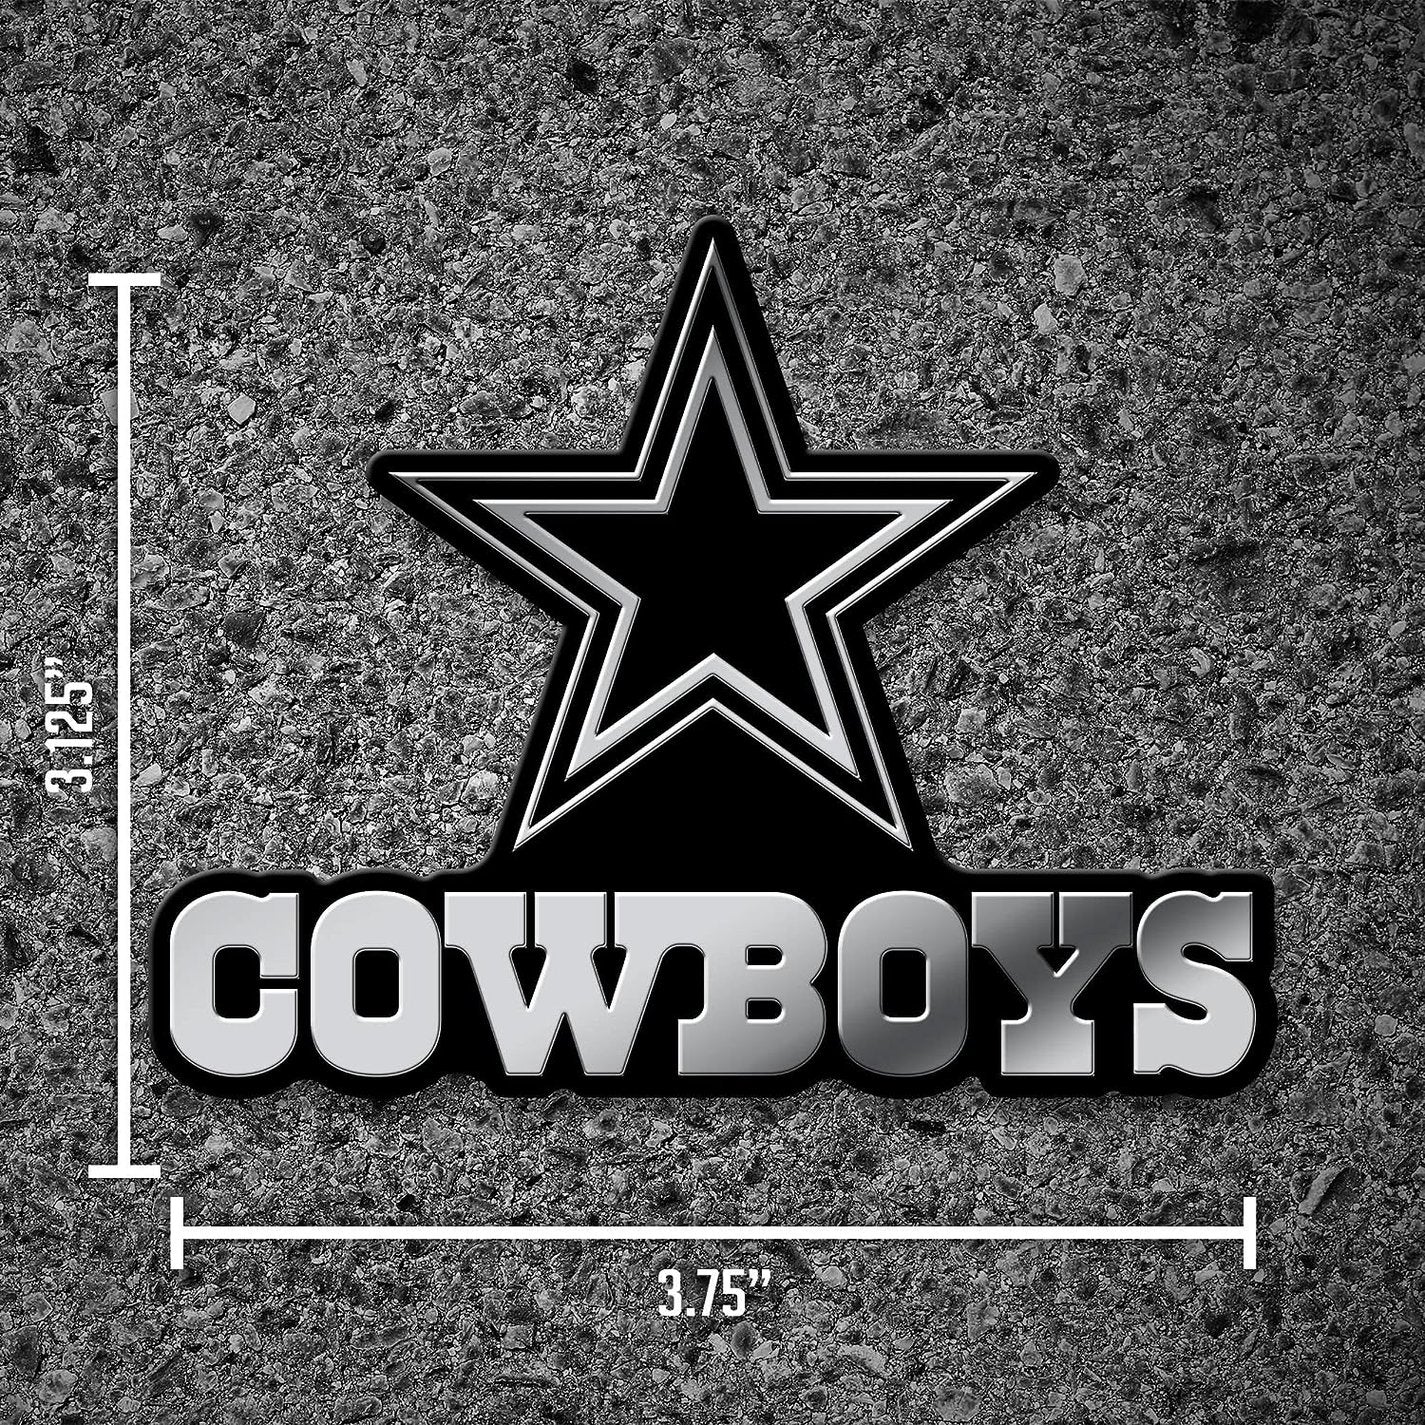 Dallas Cowboys Auto Emblem, Silver Chrome Color, Raised Molded Plastic, 3.5 Inch, Adhesive Tape Backing